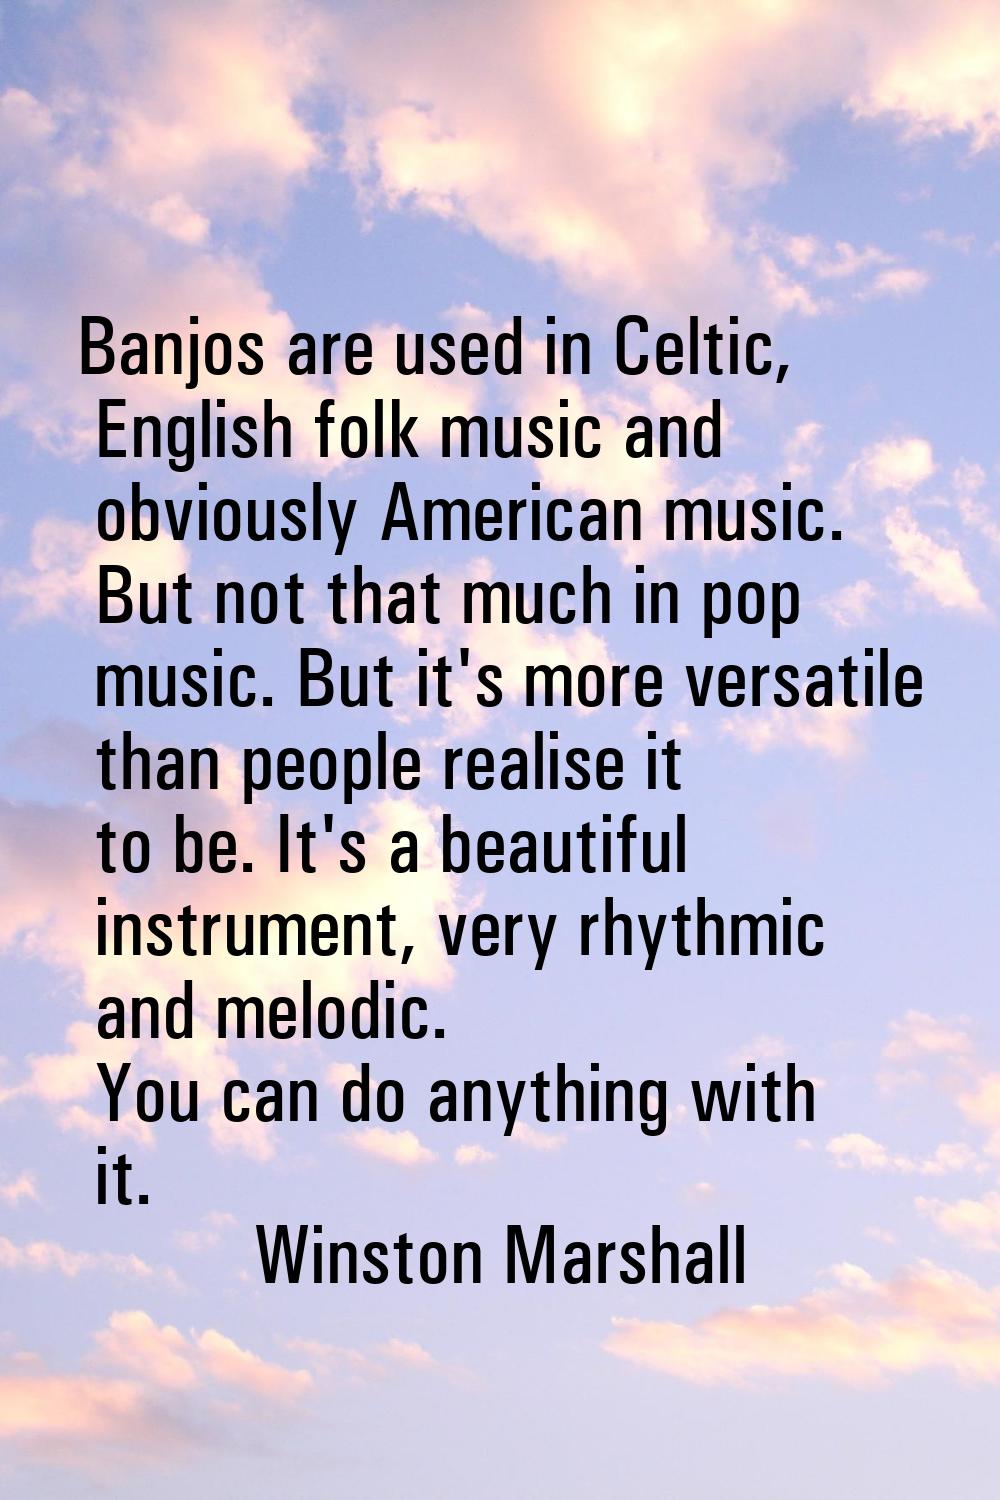 Banjos are used in Celtic, English folk music and obviously American music. But not that much in po